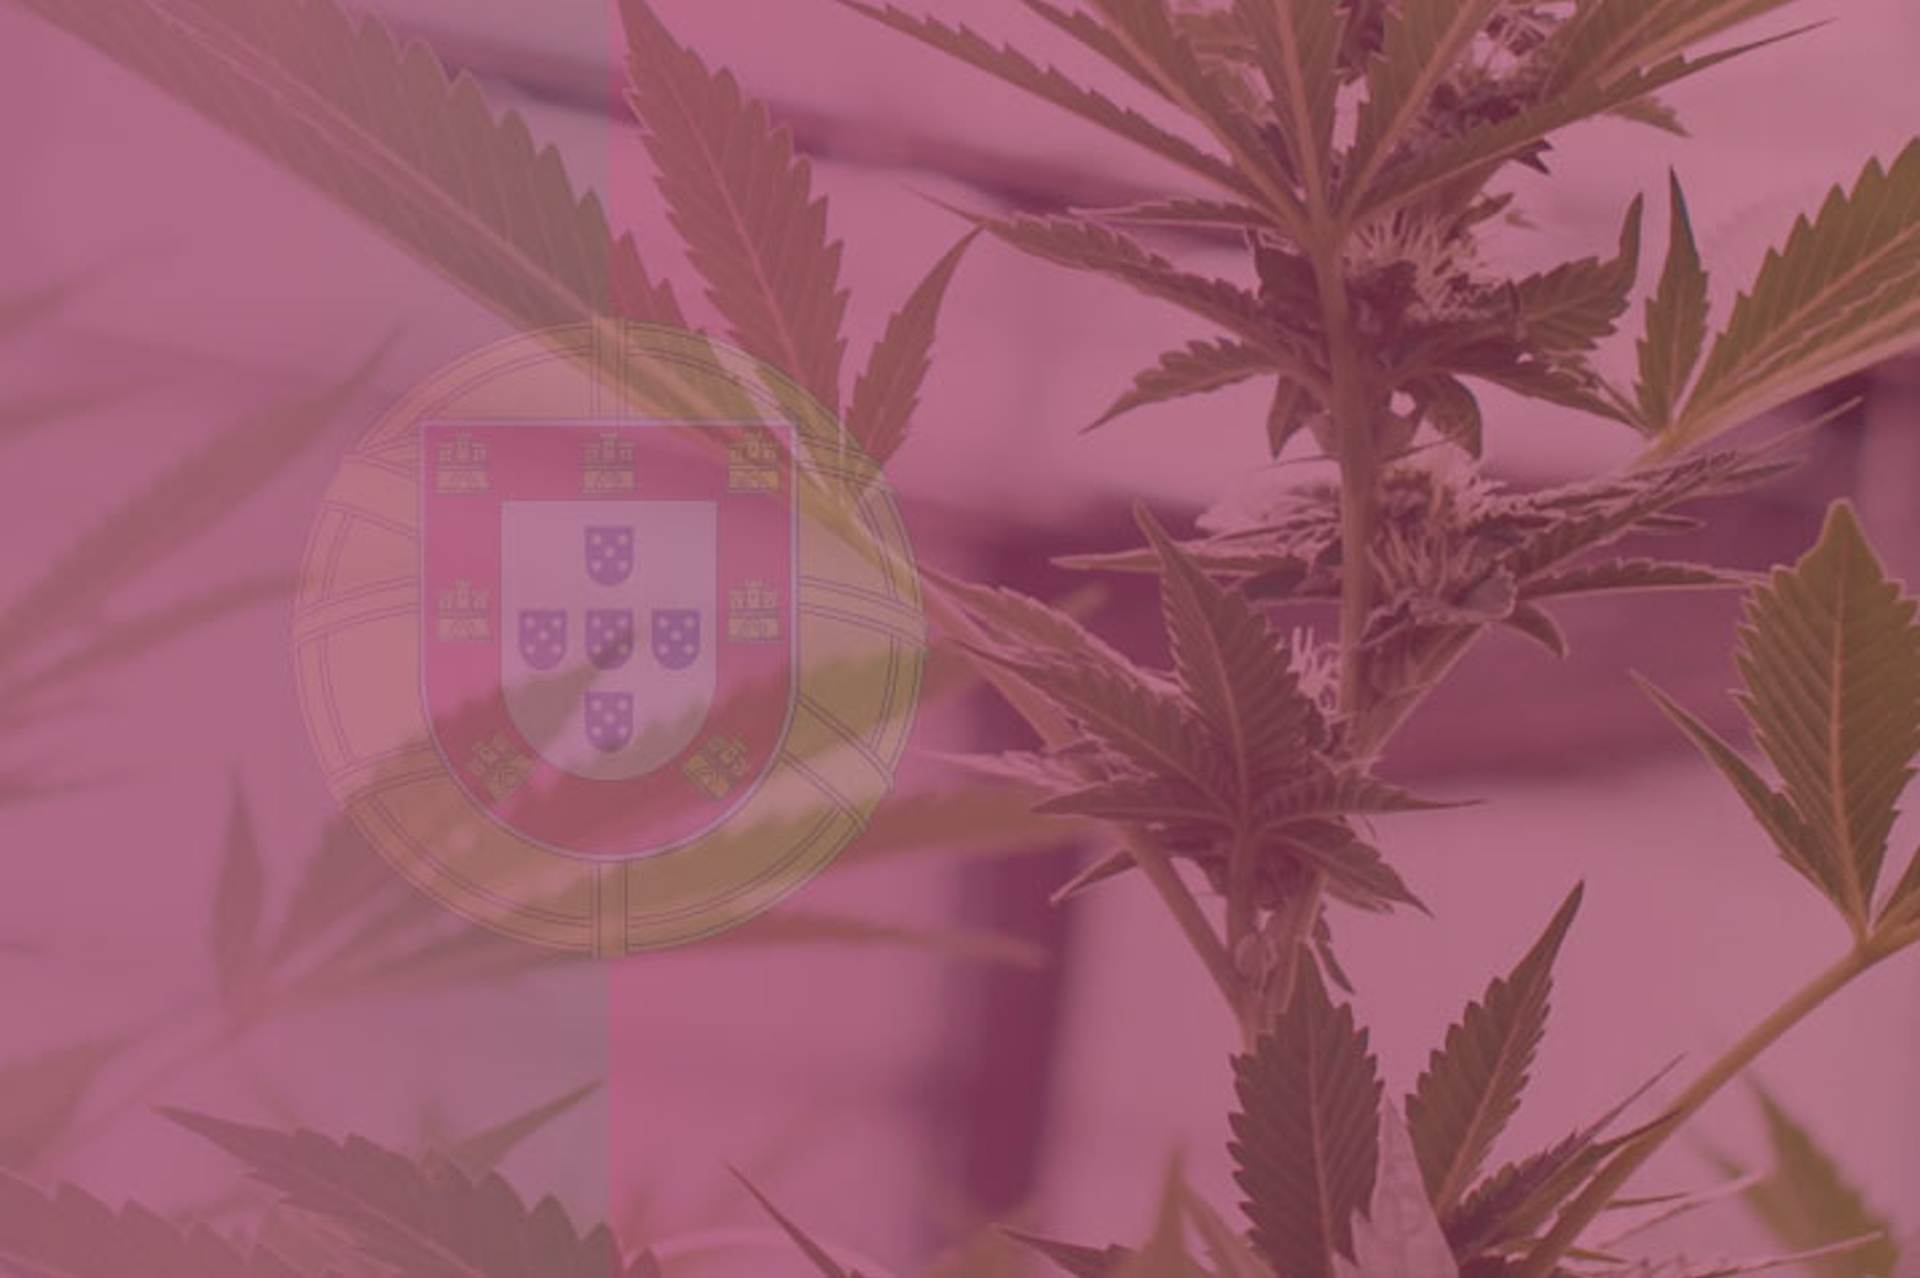 Greenhouse Cannabis Cultivation in Portugal: Regulations and Industry Insights